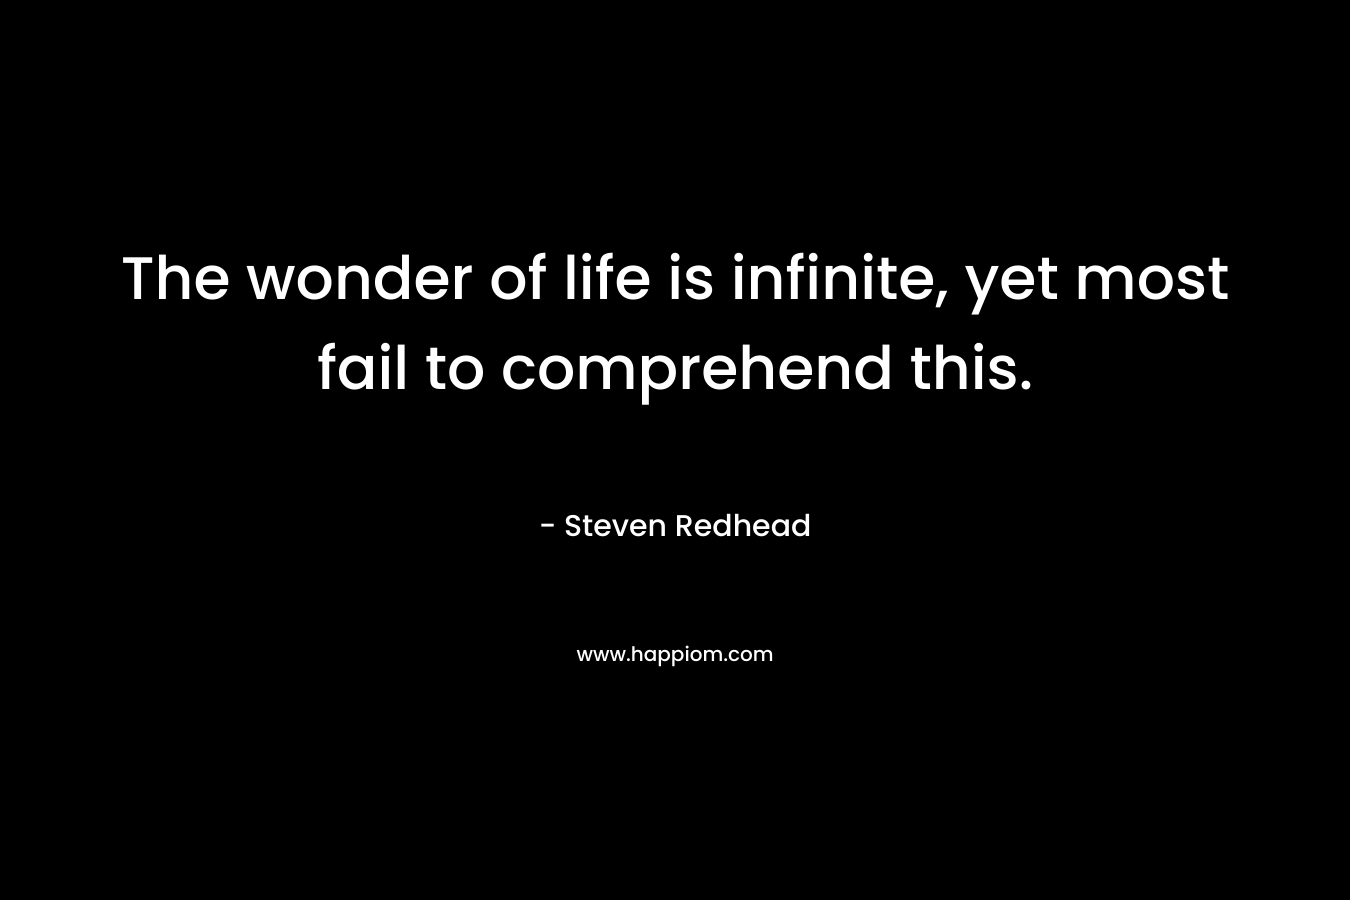 The wonder of life is infinite, yet most fail to comprehend this. – Steven Redhead